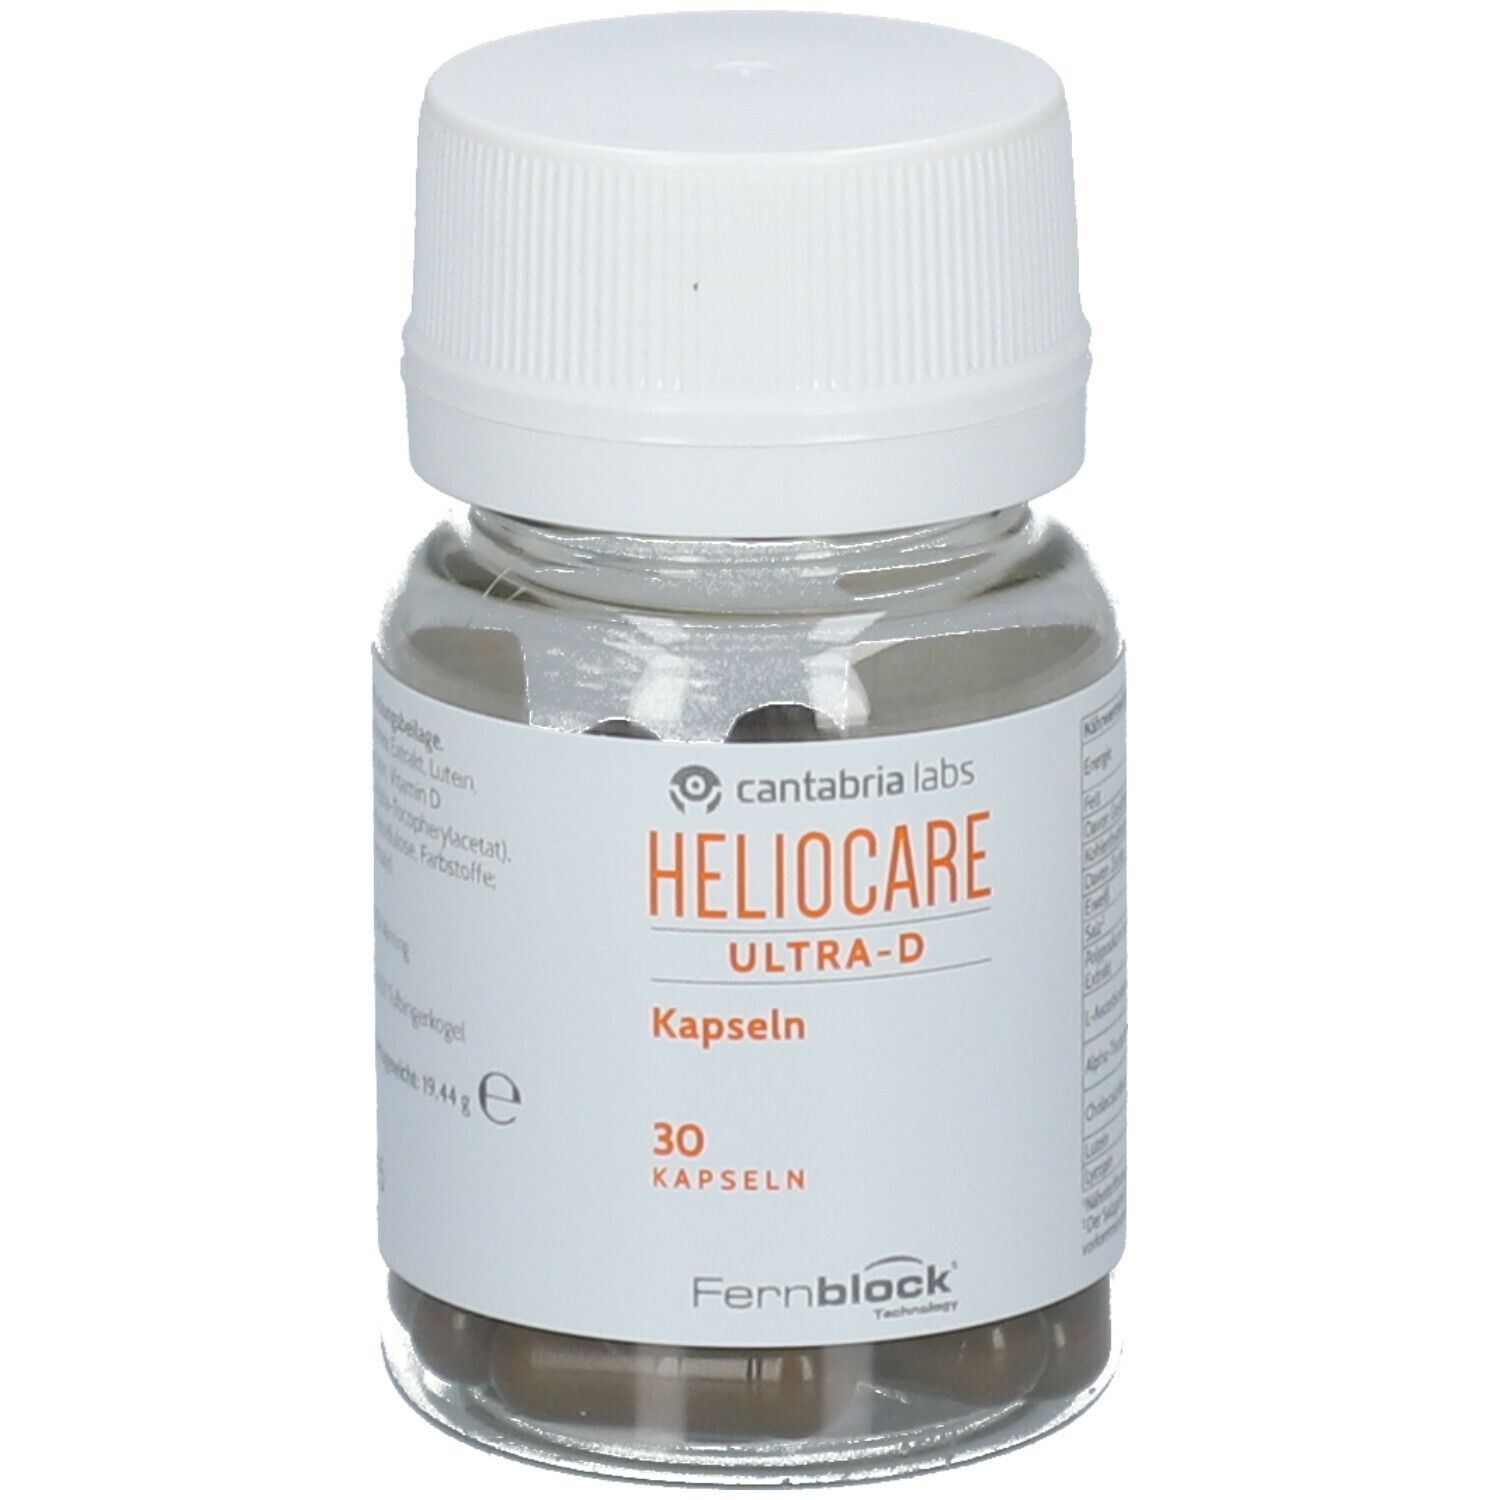 HELIOCARE® Ultra-D